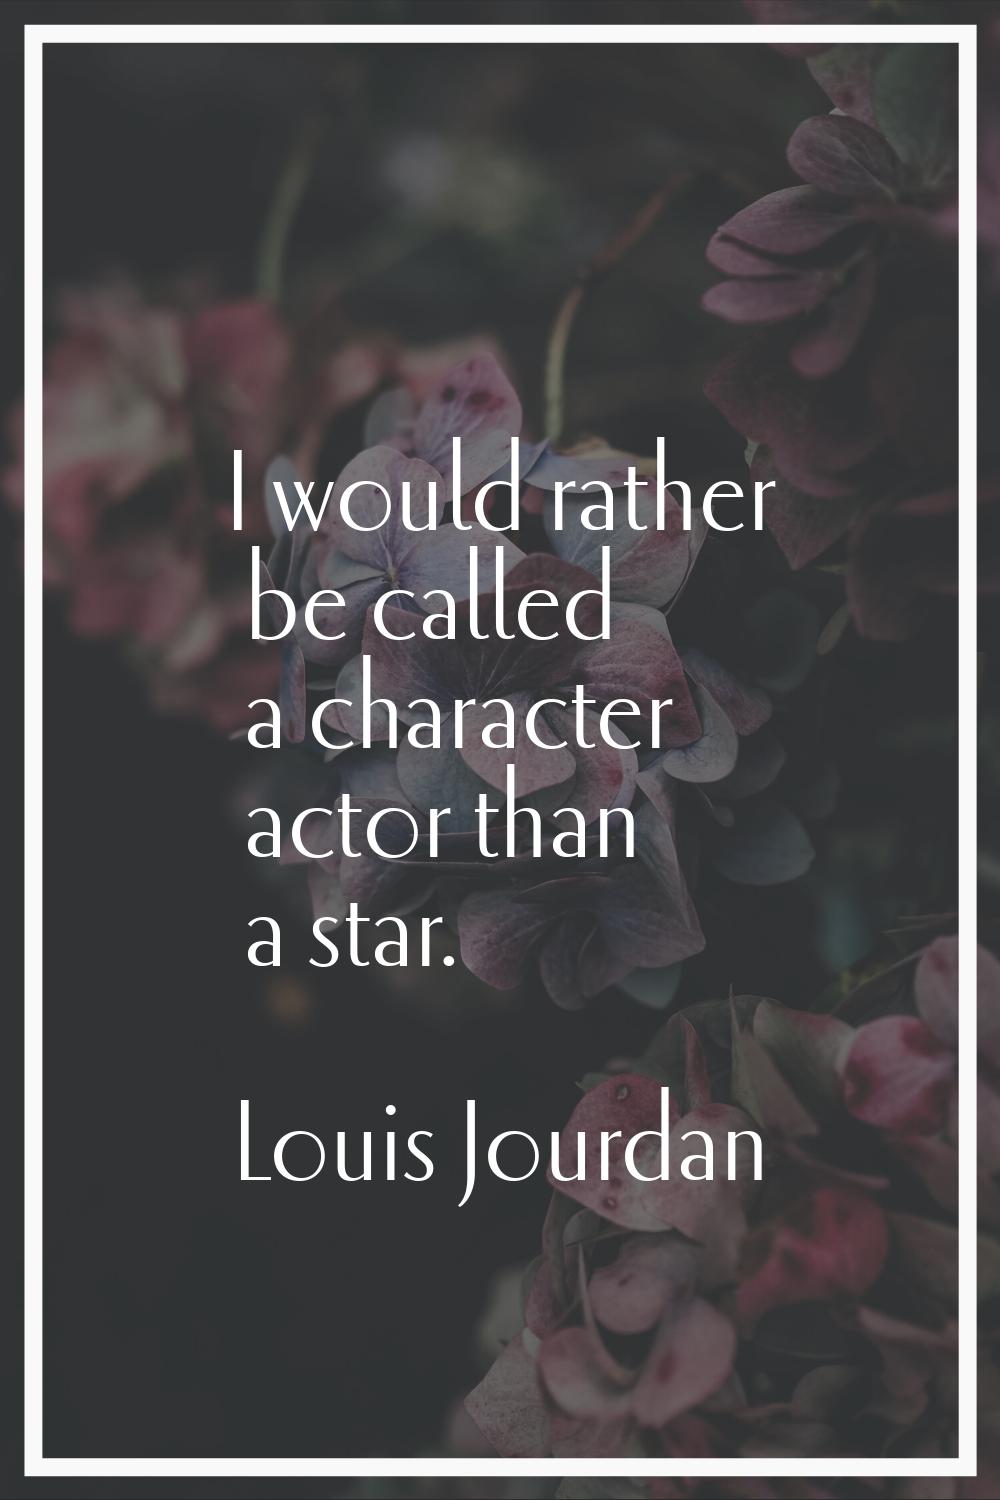 I would rather be called a character actor than a star.